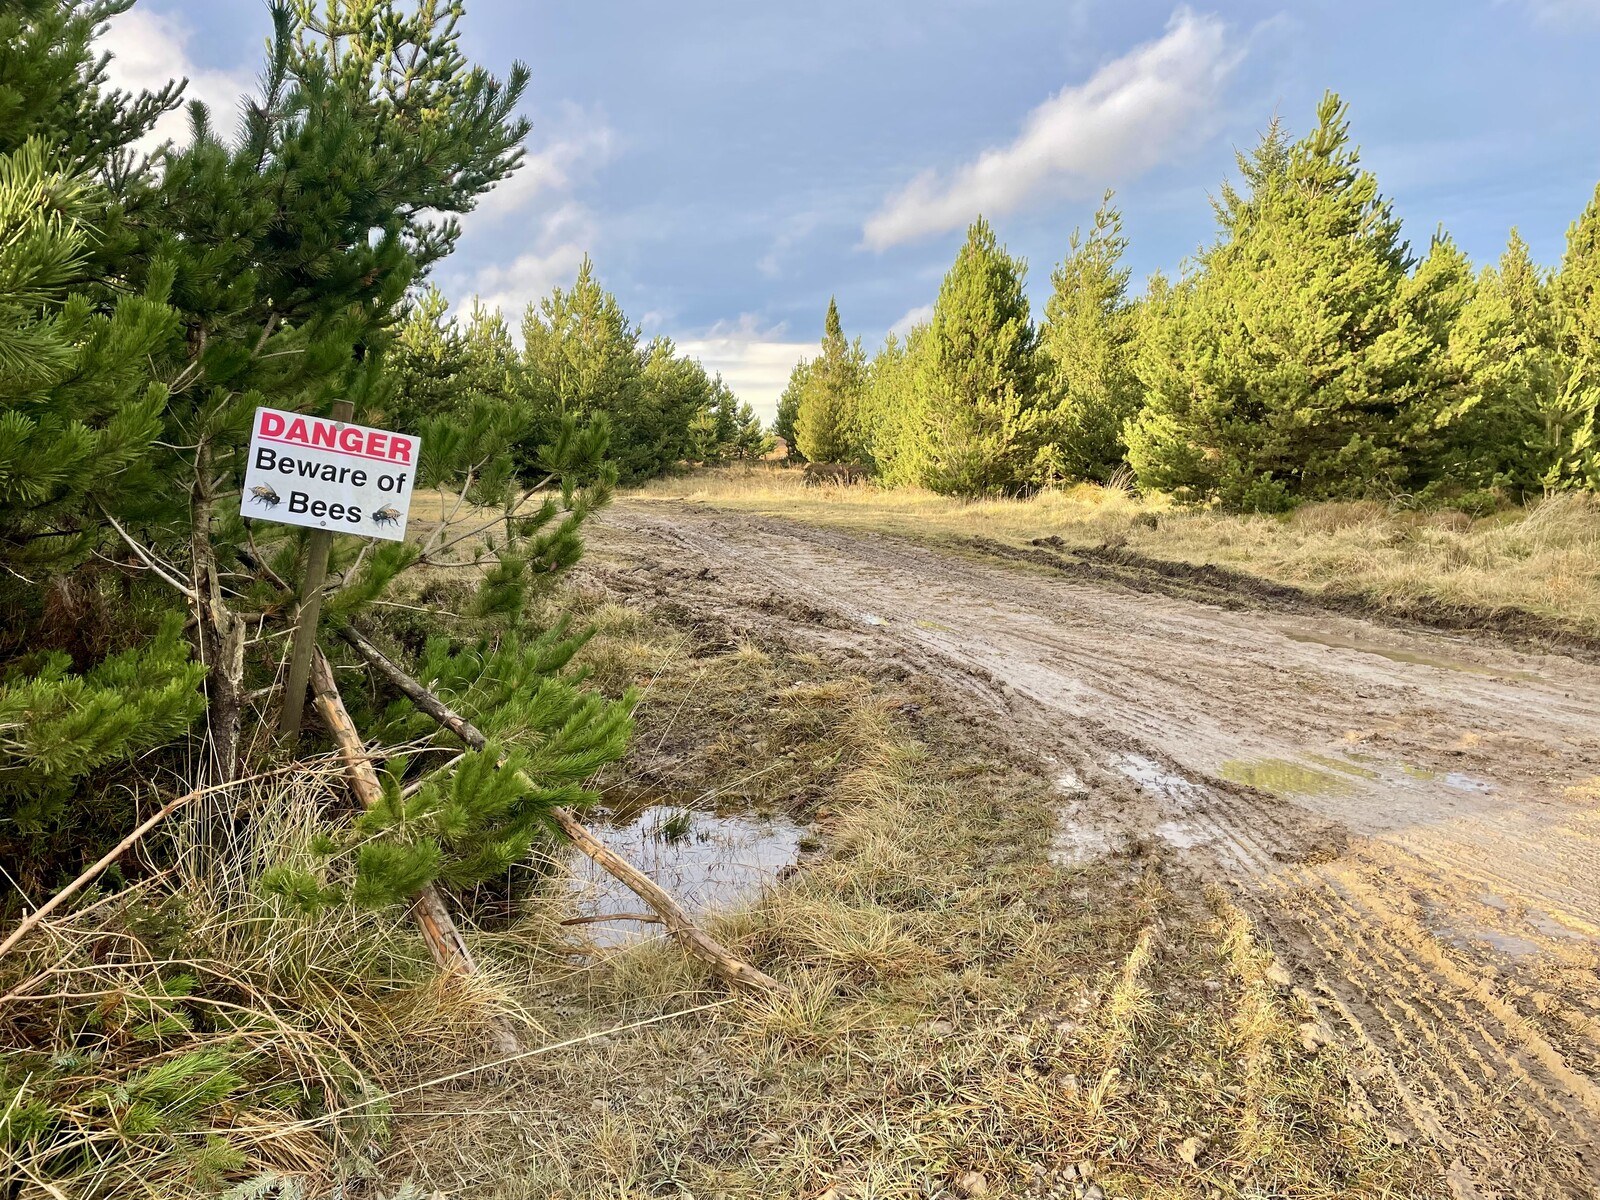 A sign reading "Danger Beware of Bees" nailed to a young evergreen tree by a muddy forestry track